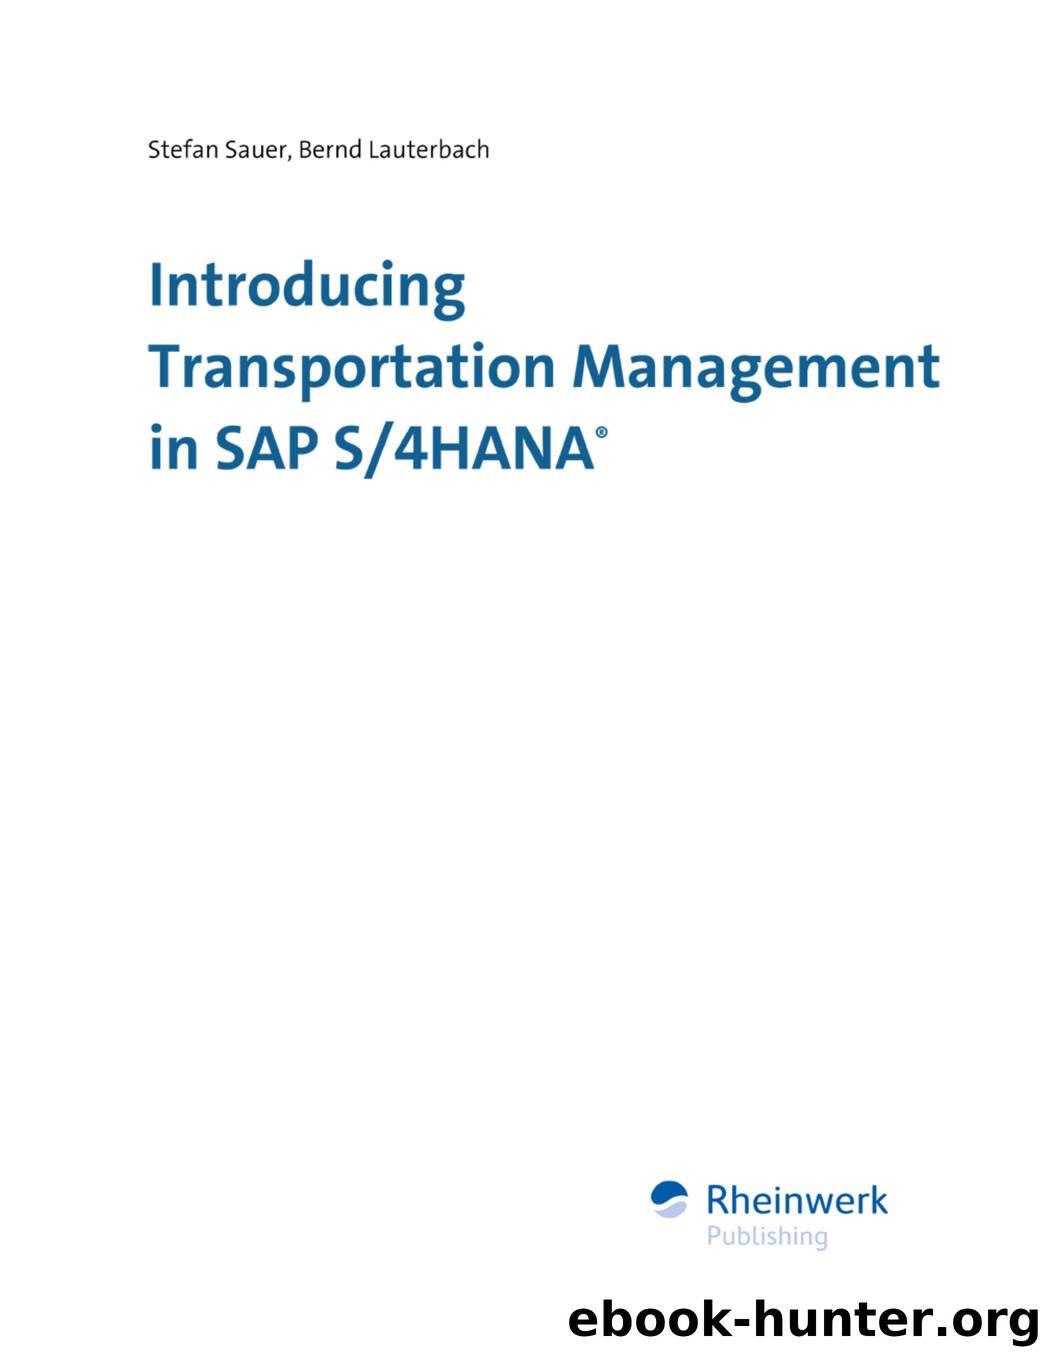 Introducing Transportation Management in SAP S4HANA by Unknown